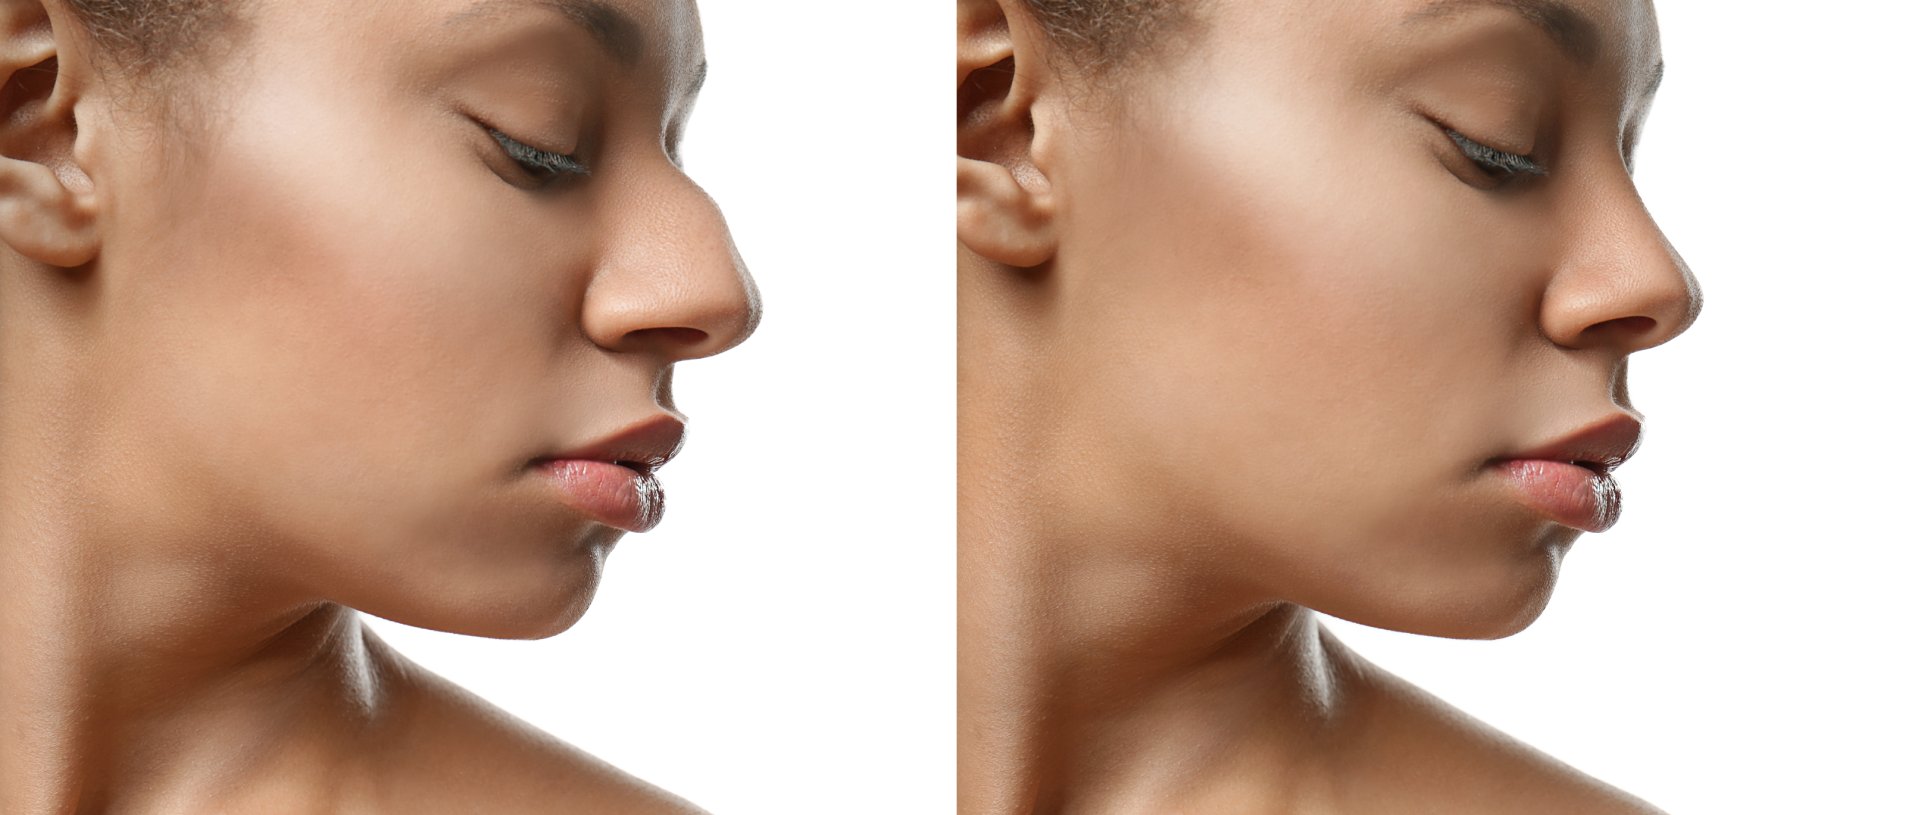 young African-American woman before and after rhinoplasty